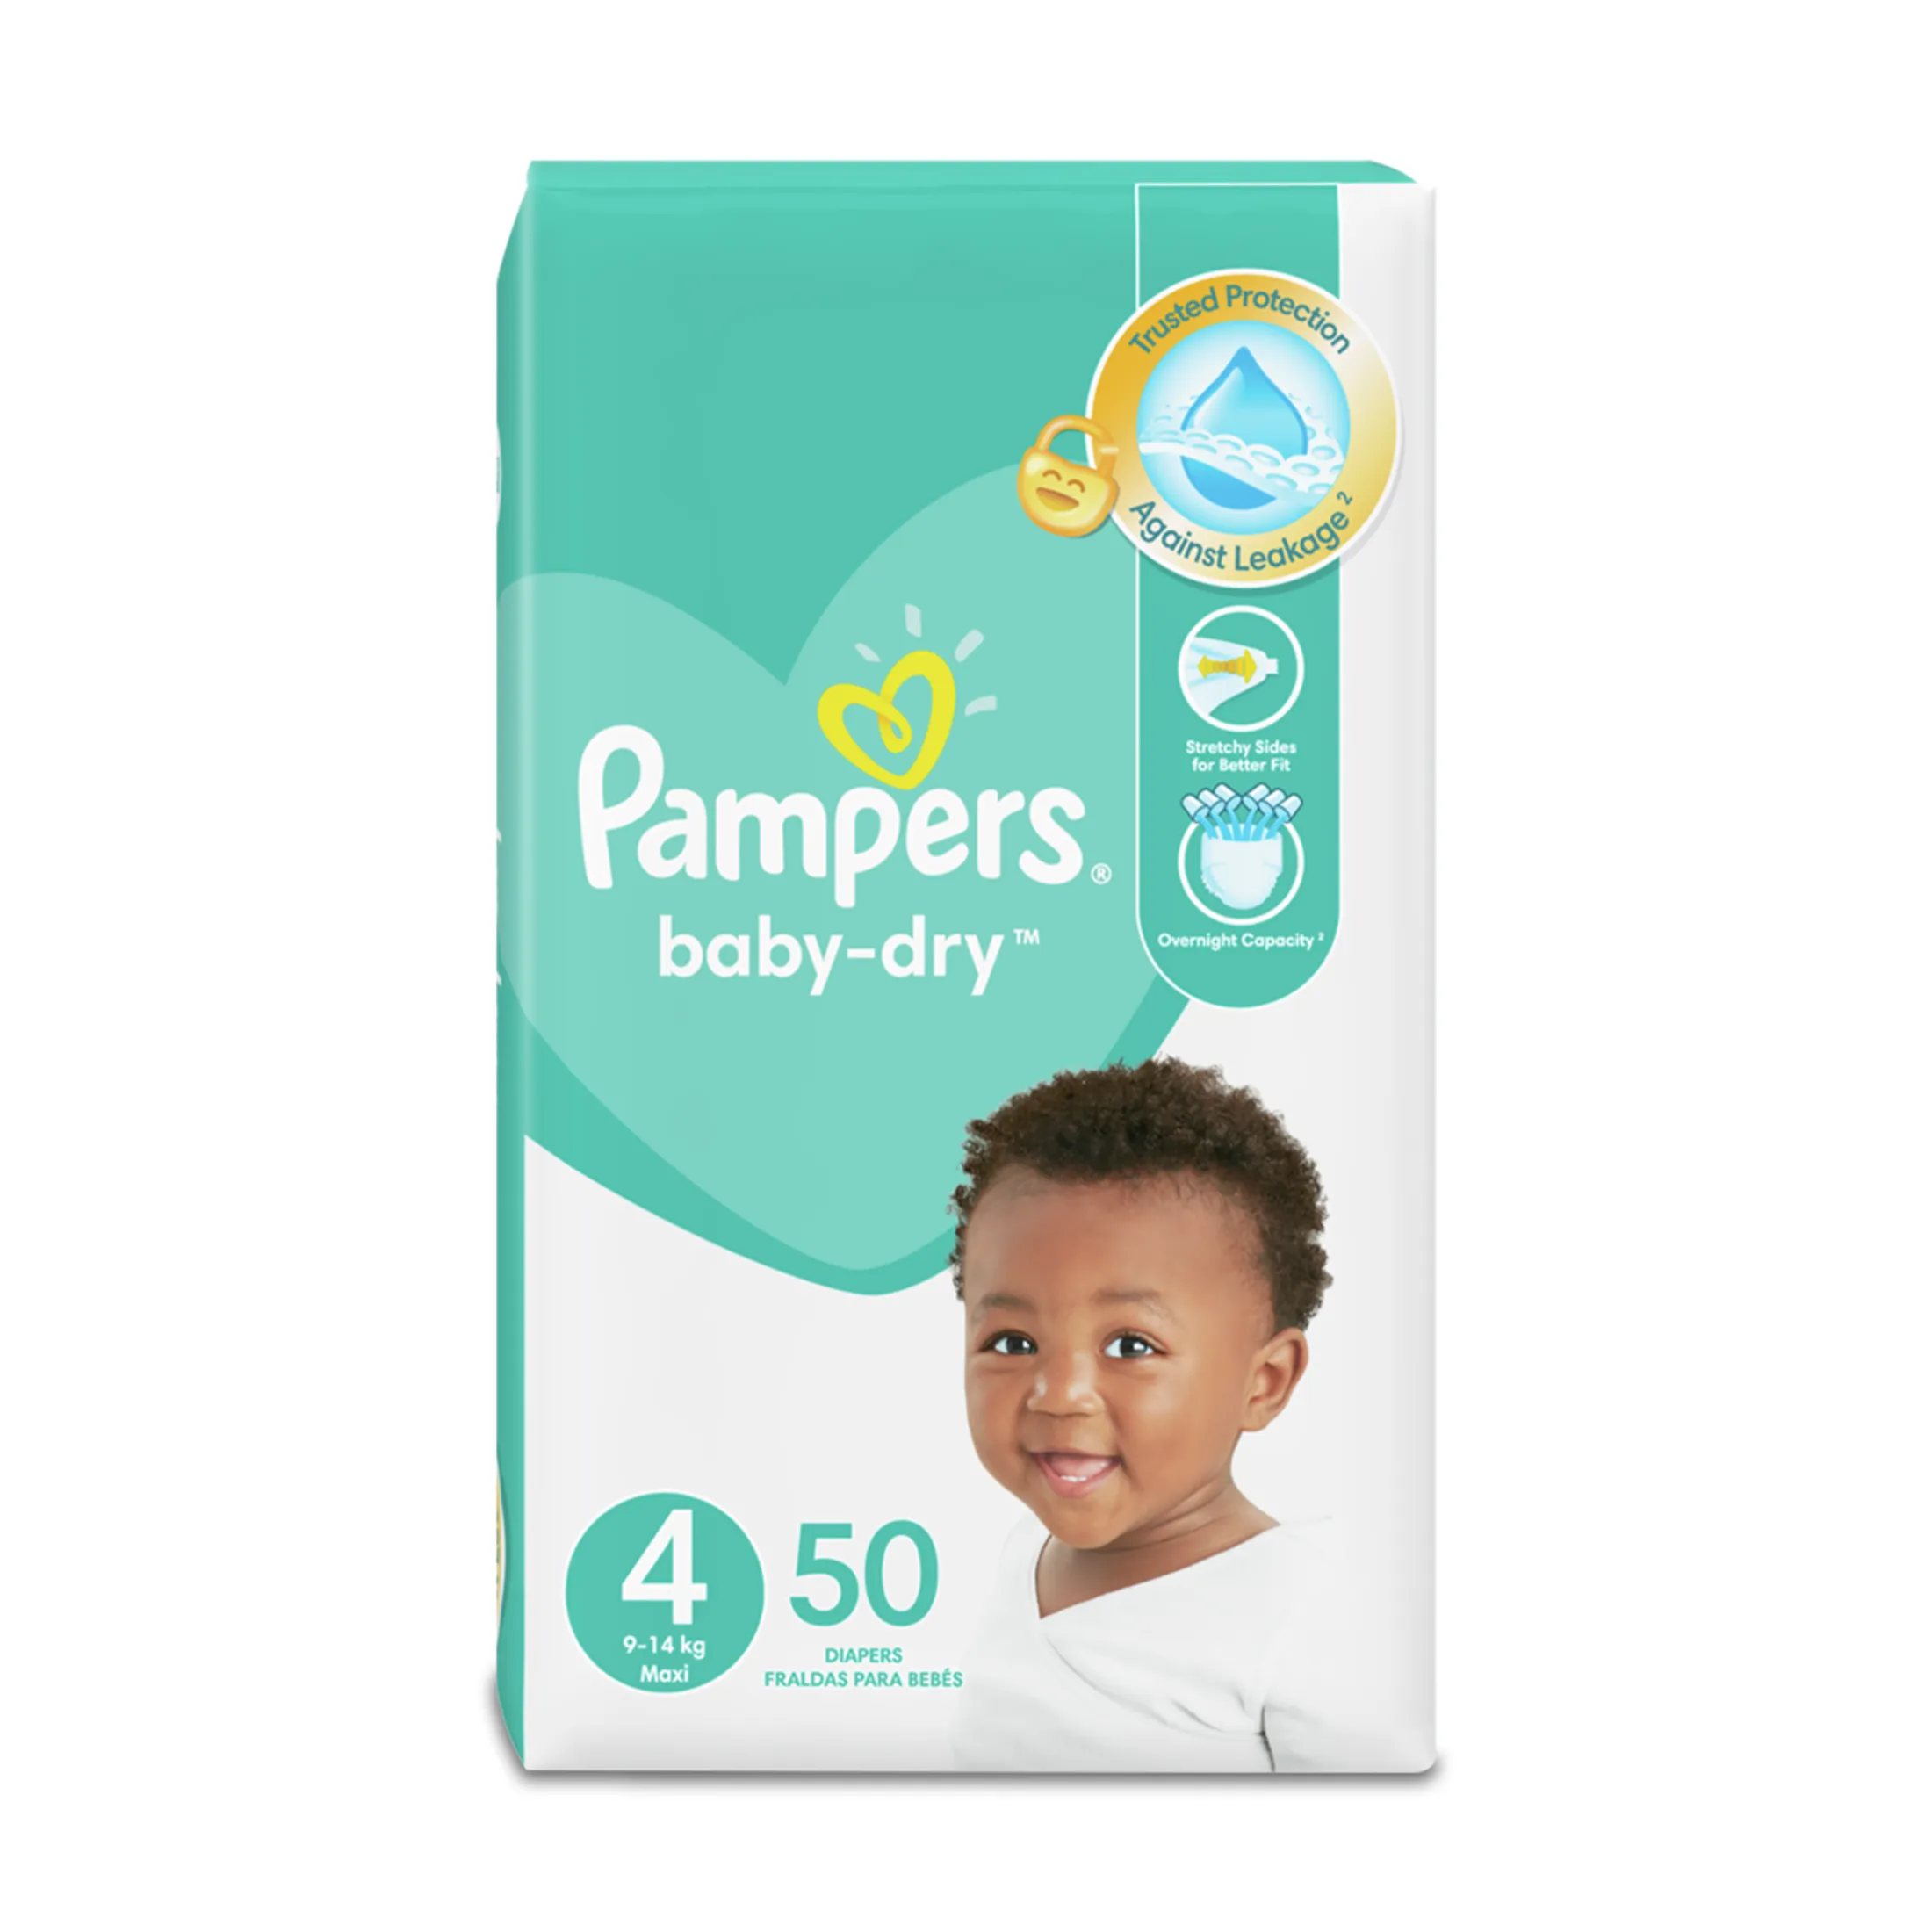 pampers ative baby 4